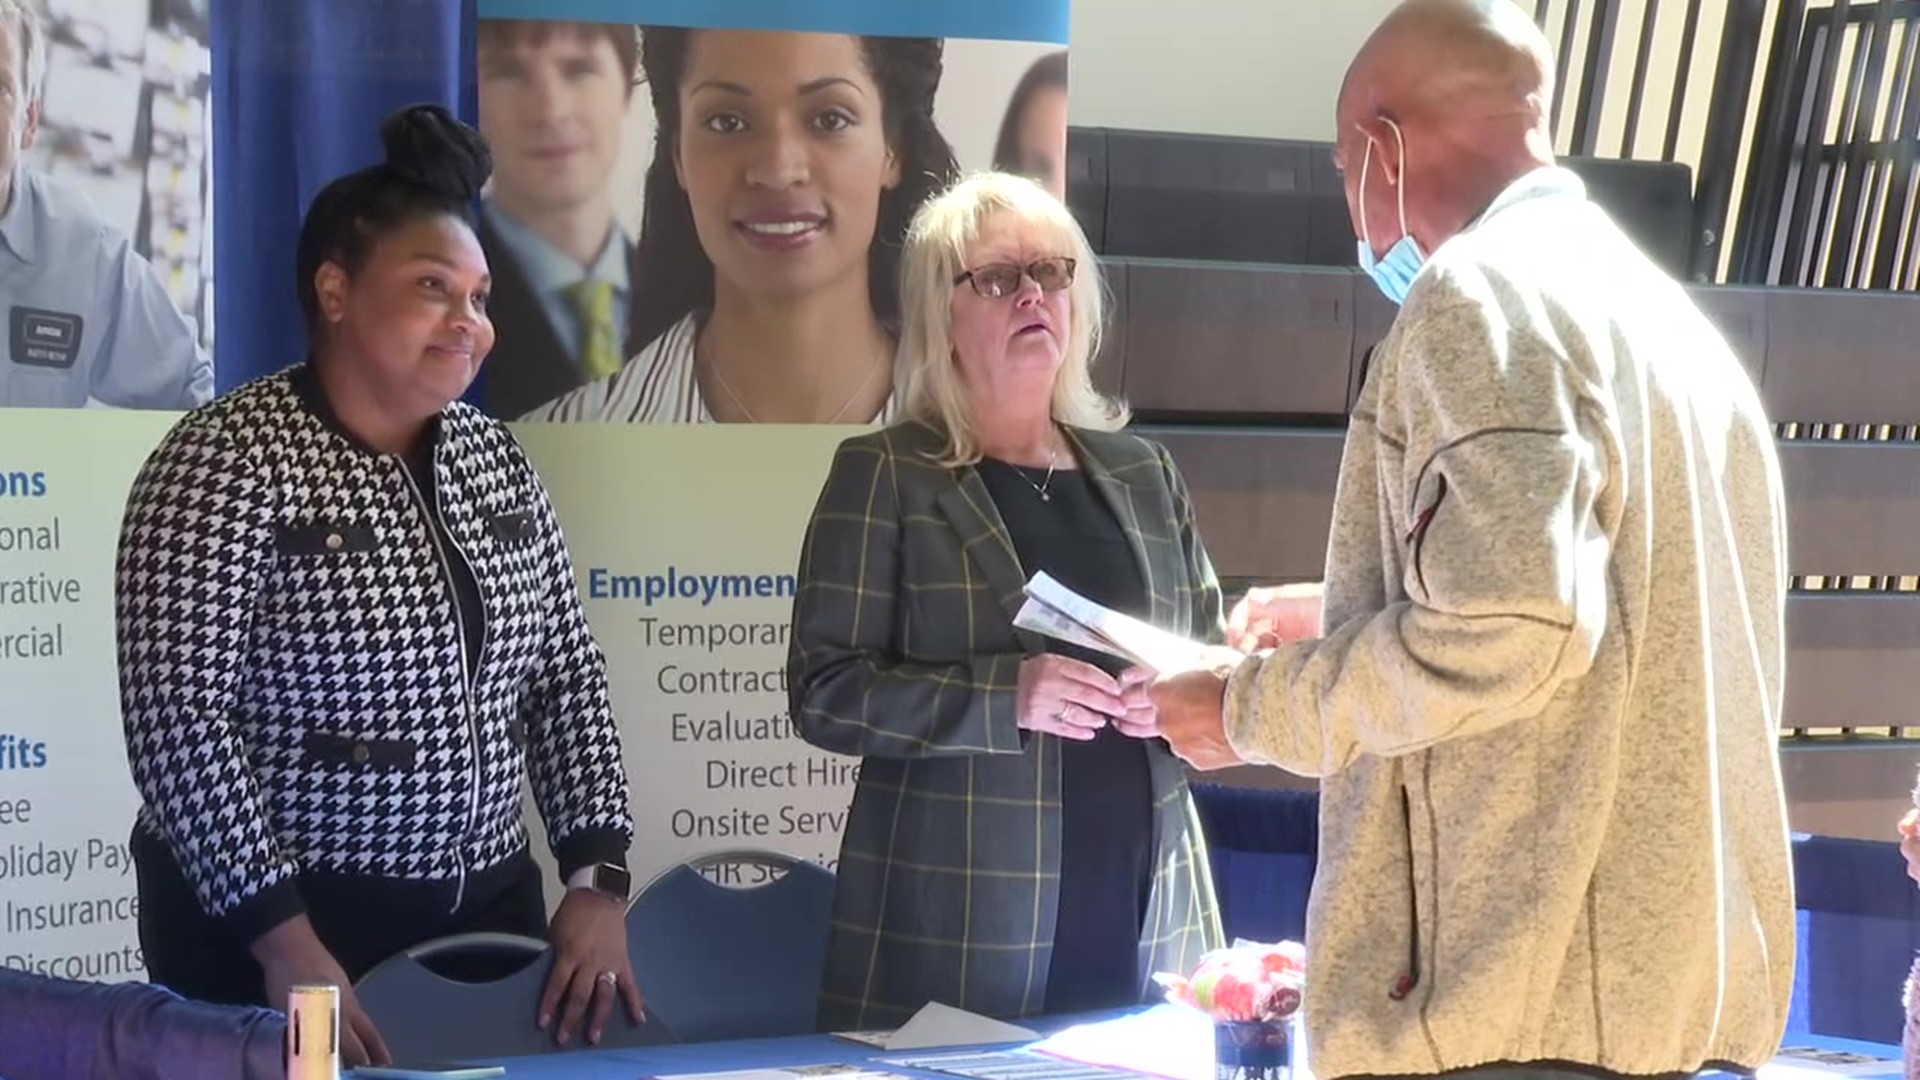 More than 50 employers were looking to fill hundreds of open positions.